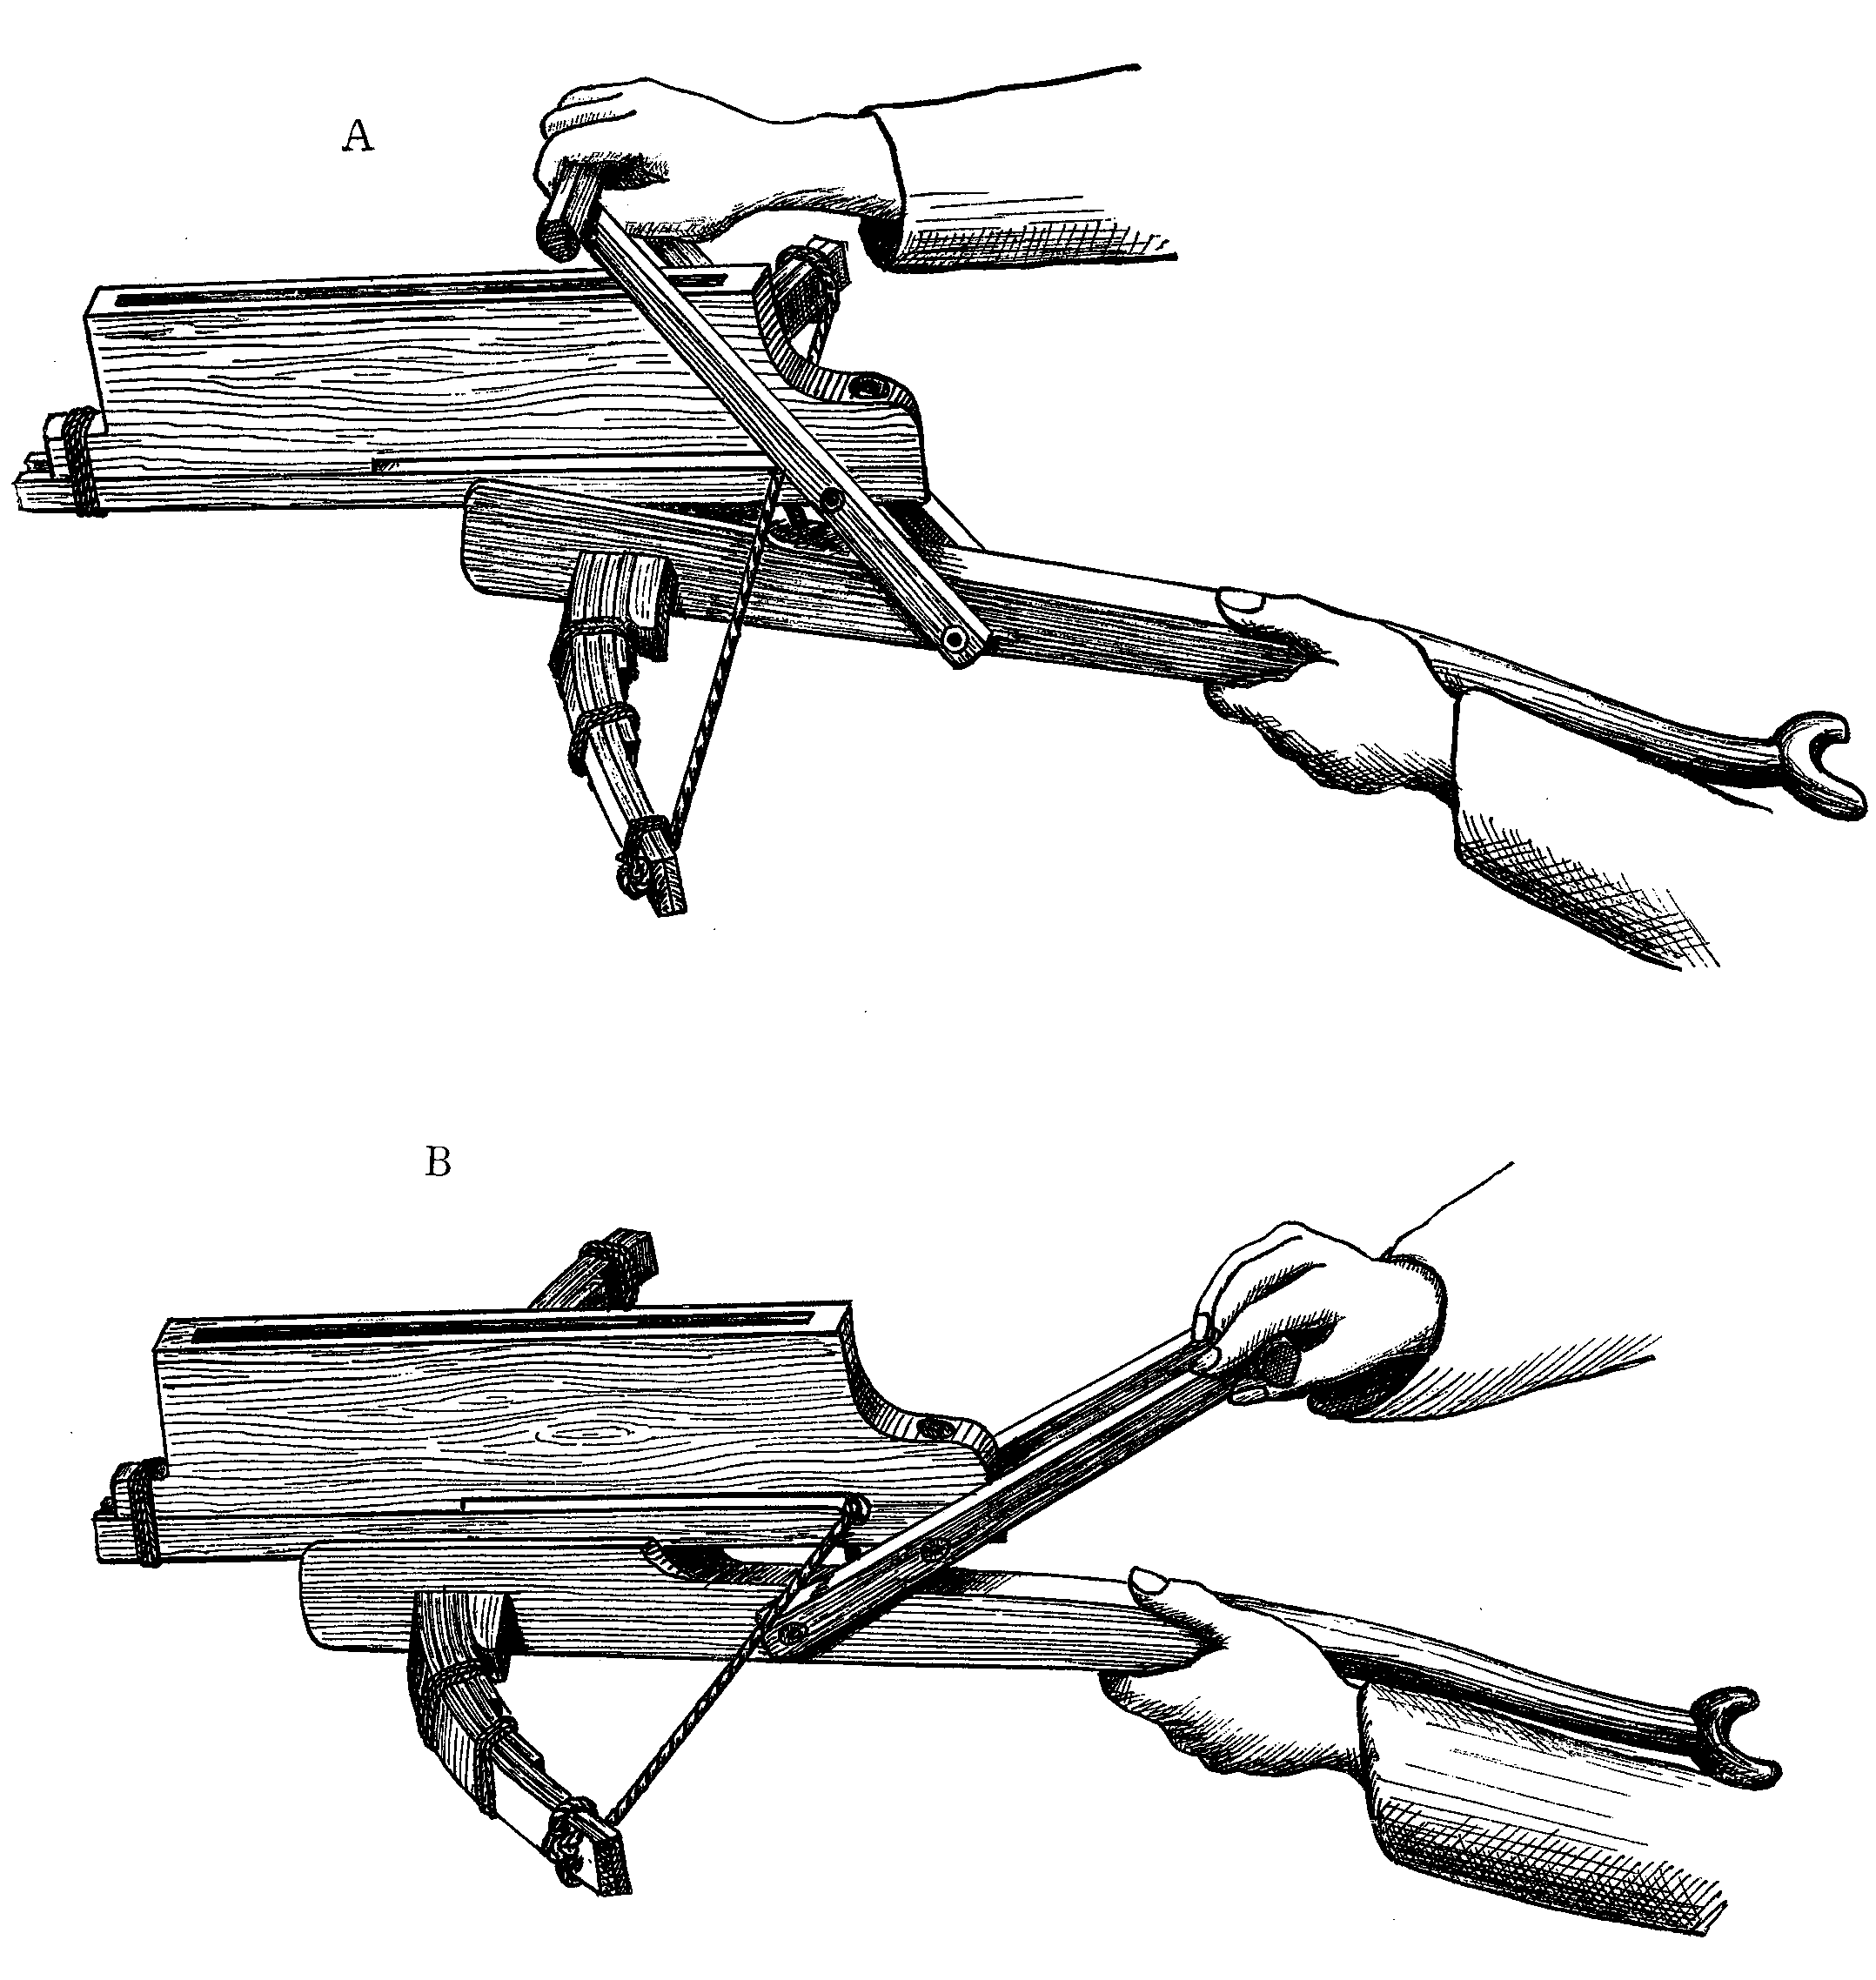 repeating crossbow history